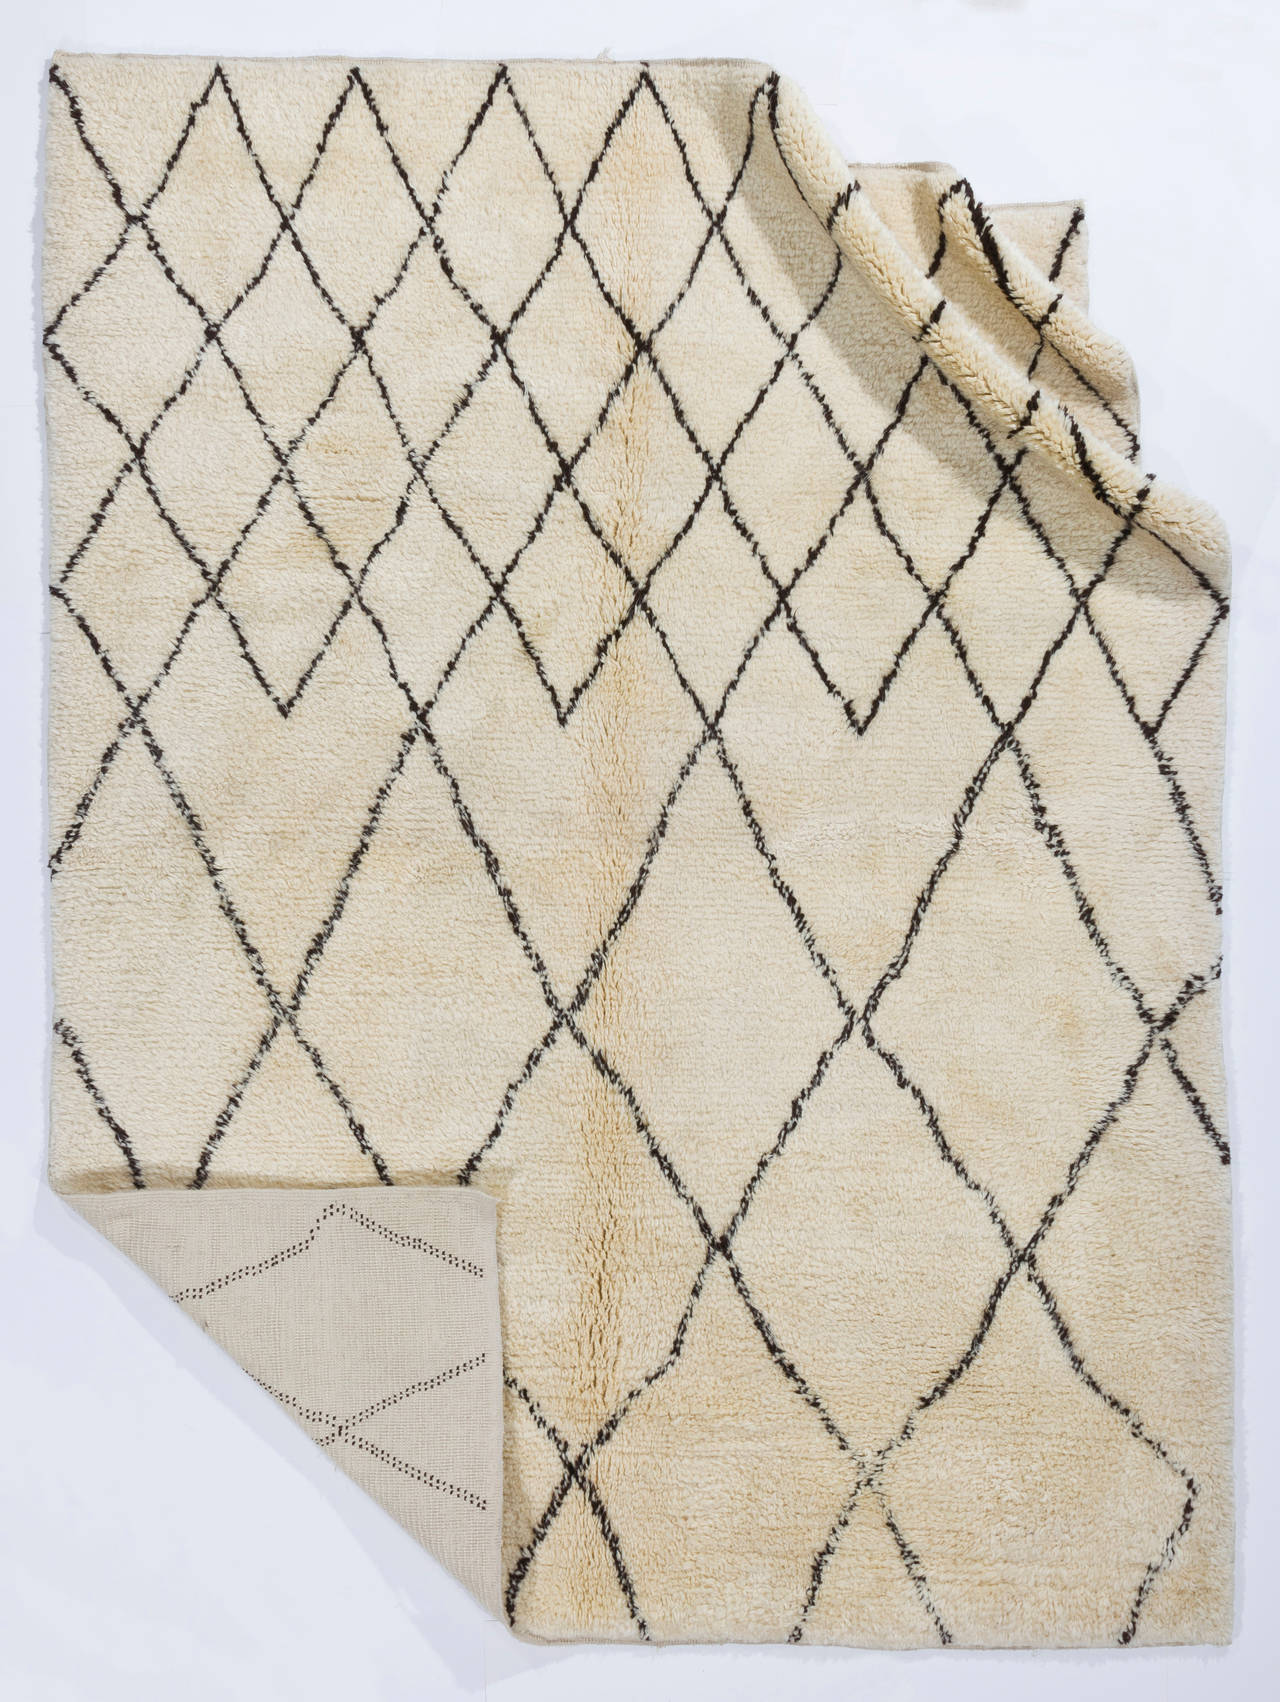 Modern Contemporary Moroccan Rug Made of Natural Undyed Wool